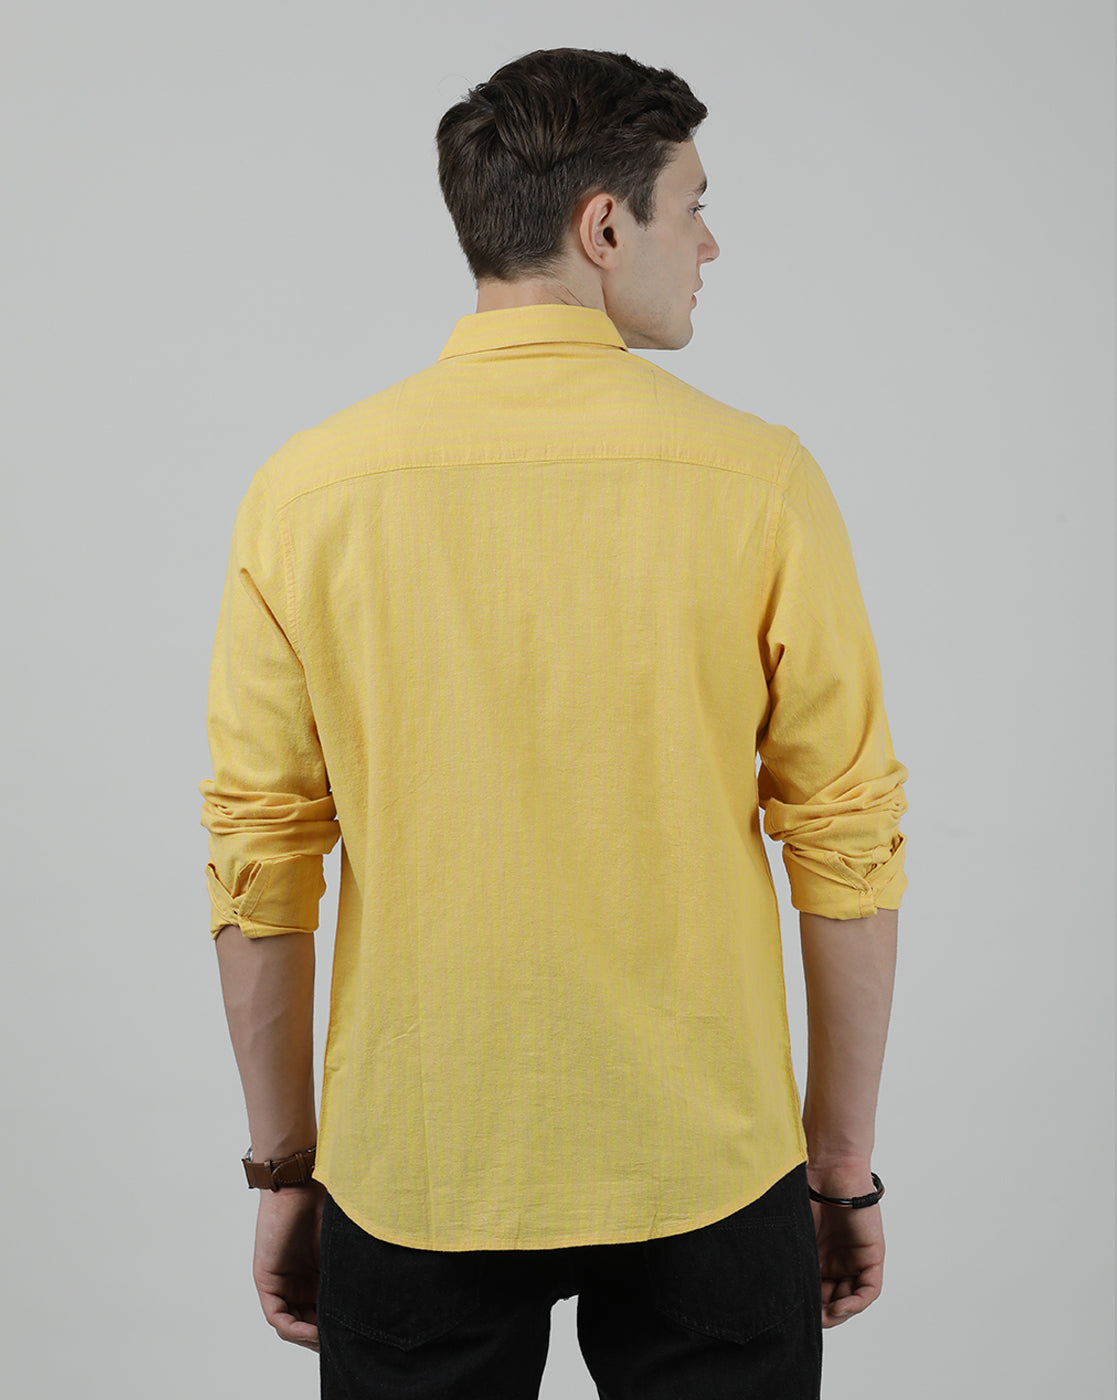 Casual Full Sleeve Comfort Fit Stripe Shirt Yellow for Men